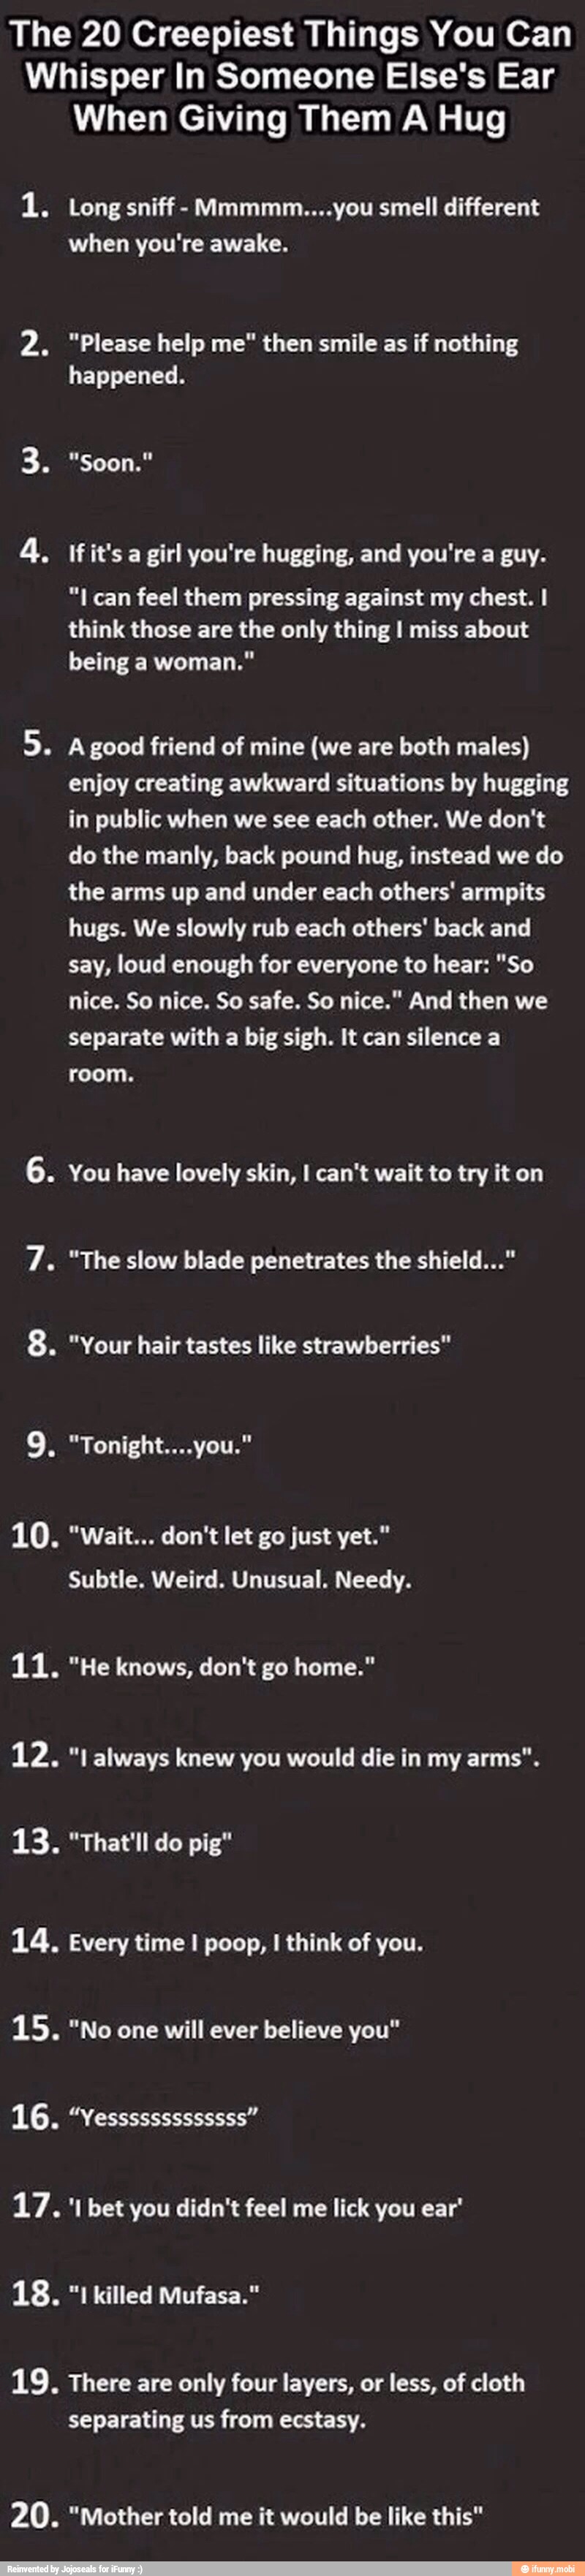 The 20 Creepiest Things You Can Whisper In Someone Else's Ear When ...